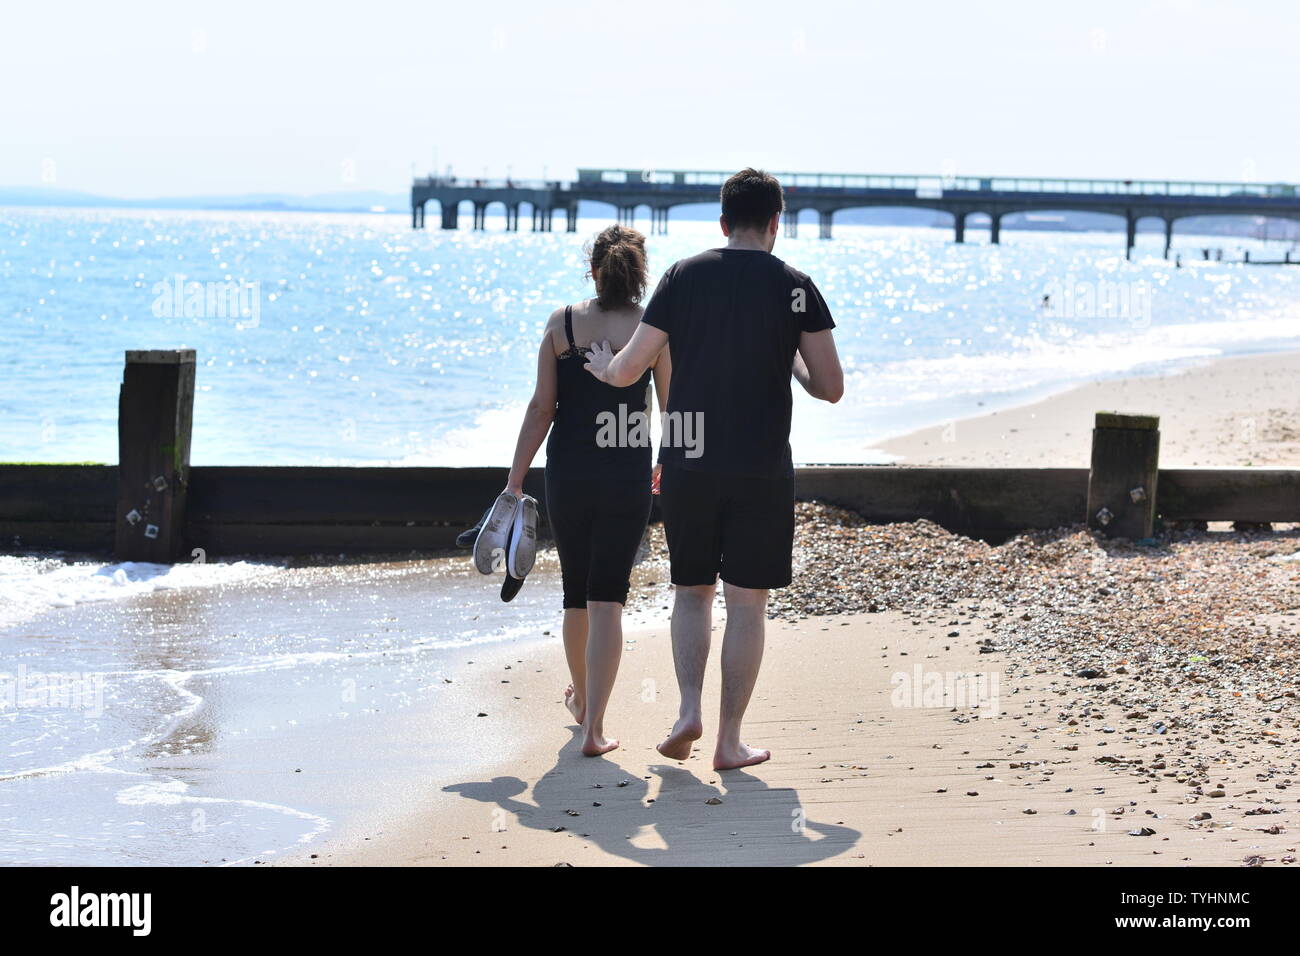 Romantic young couple walking on the beach in summer with shoes off and touching affectionately, Boscombe, Bournemouth, Dorset, England, UK, June, 2019 Stock Photo